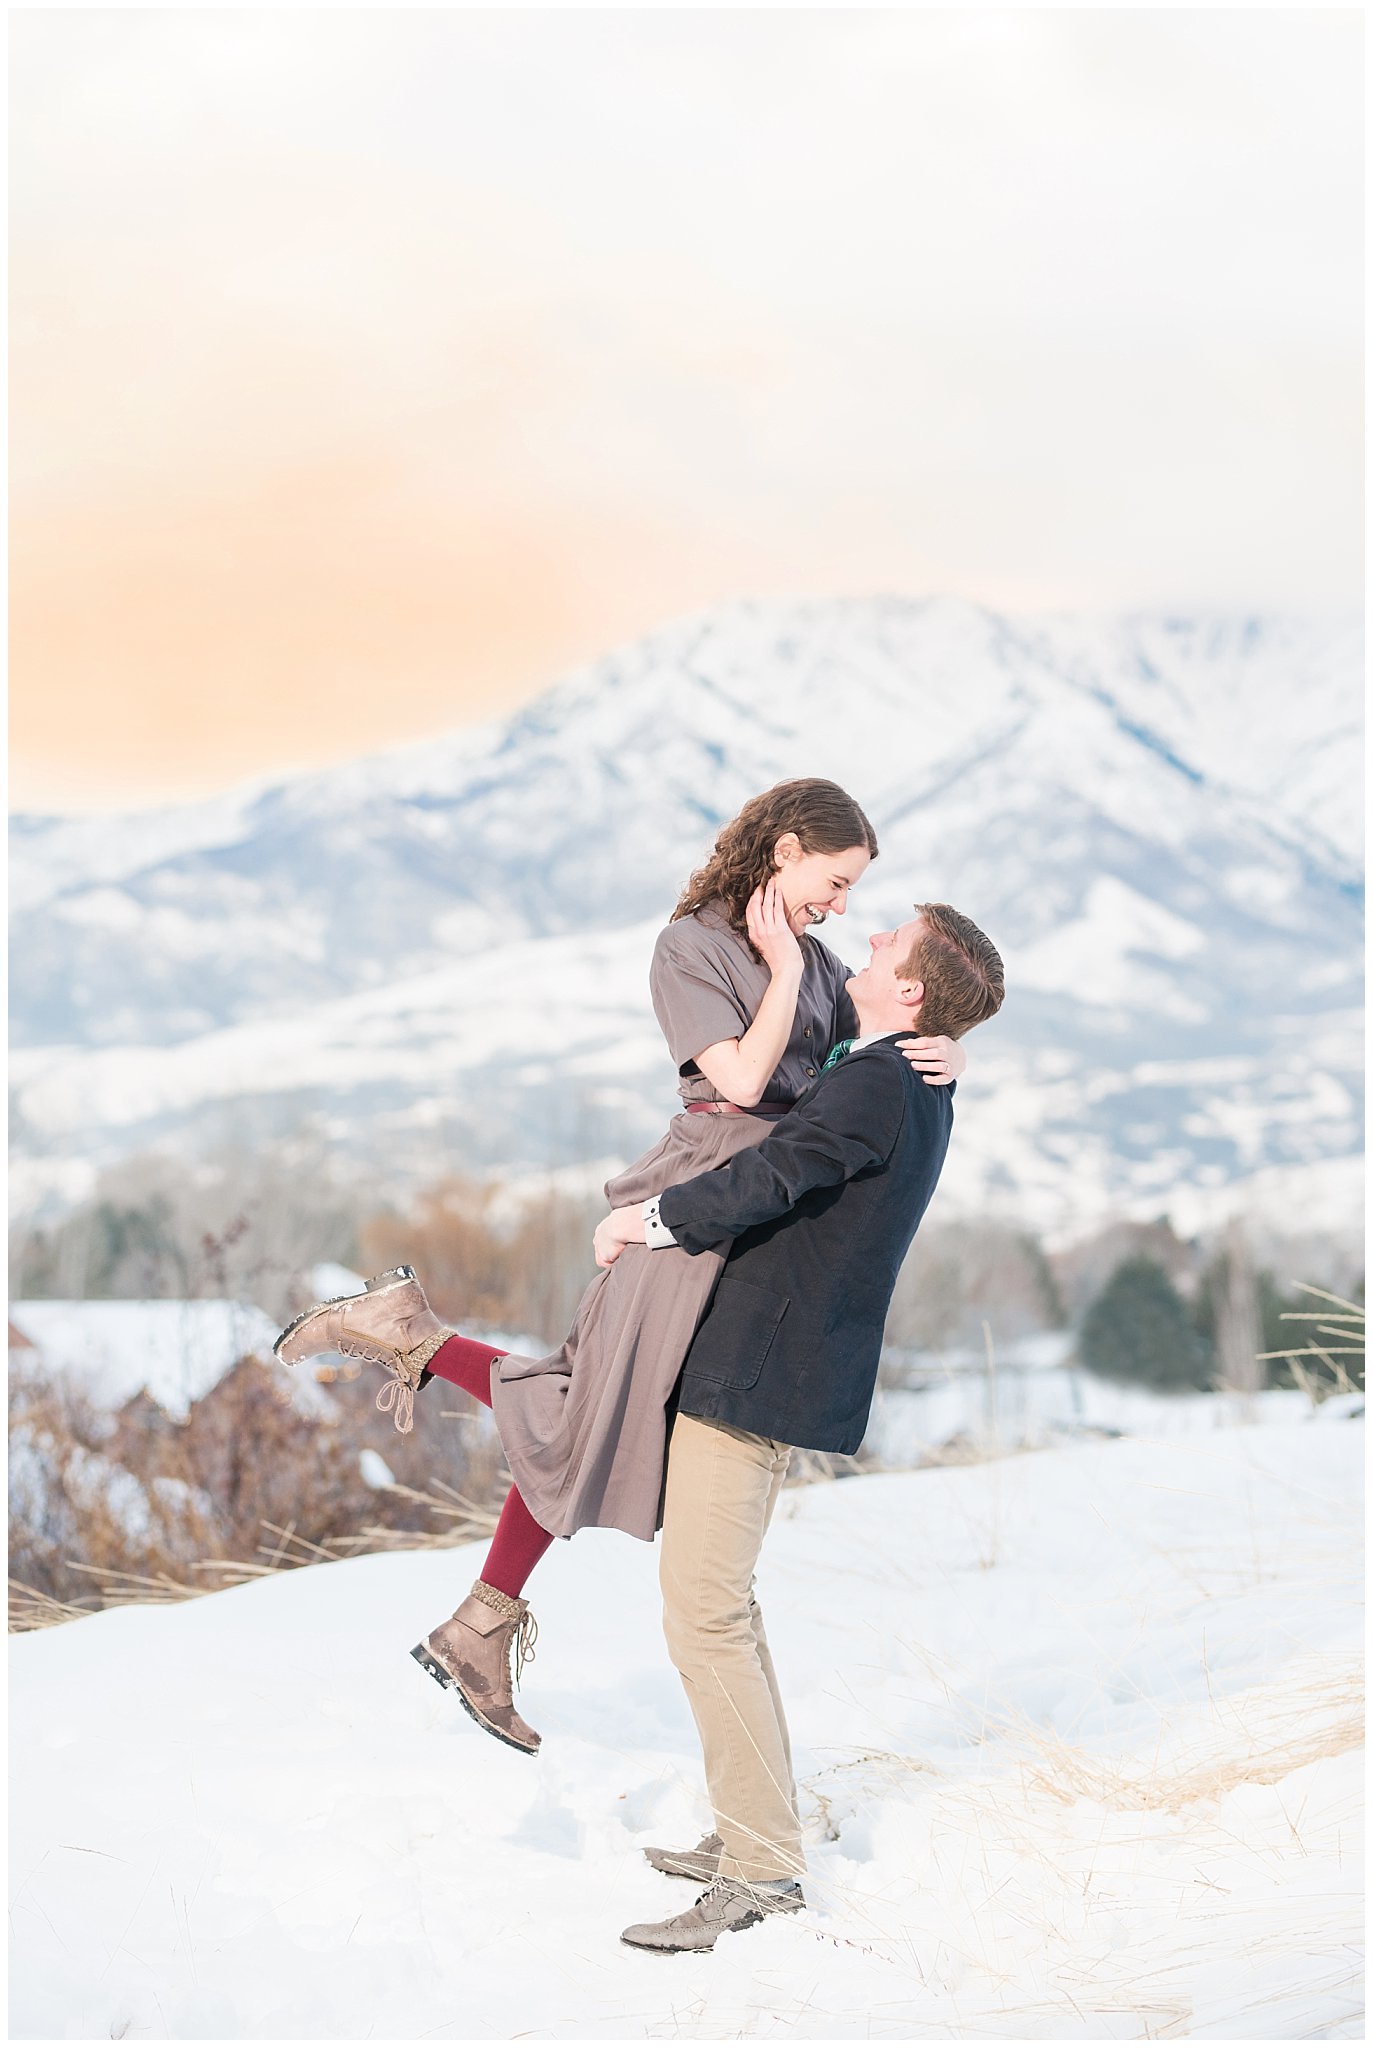 Couple does a romantic lift at sunset in the snowy Utah mountains | Top Utah Wedding and Couples Photos 2019 | Jessie and Dallin Photography